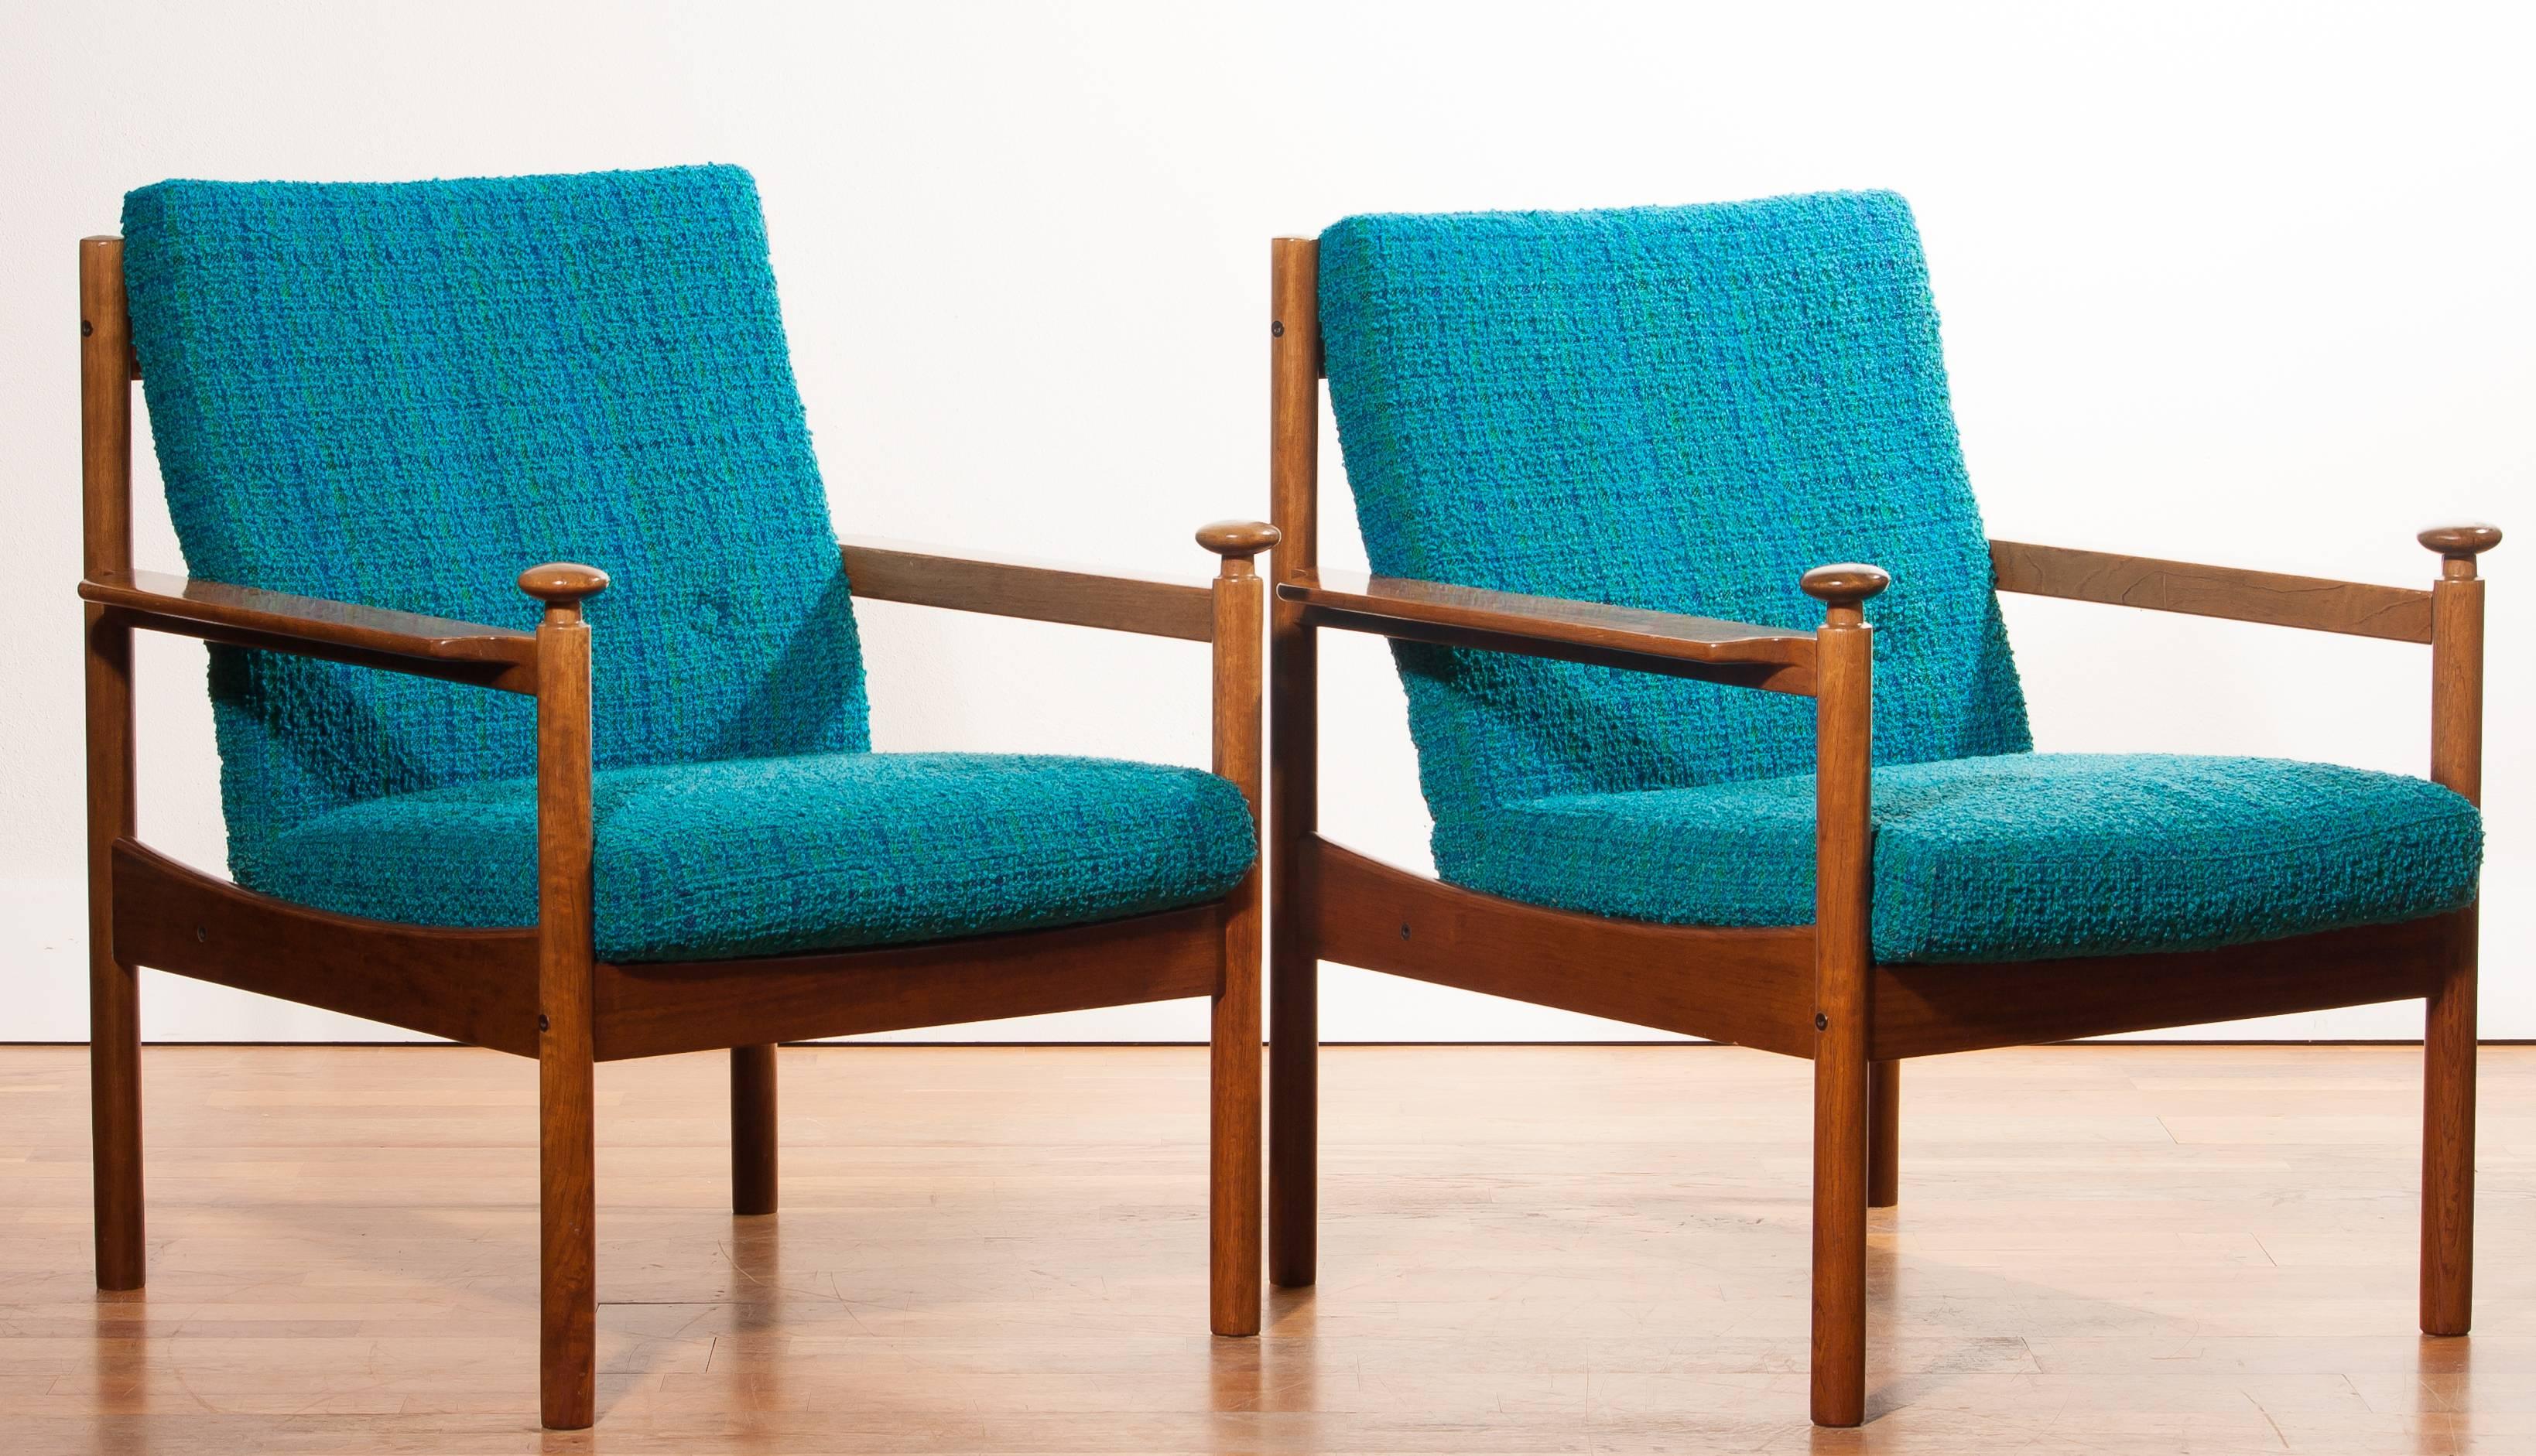 Fabric 1950s, a Pair of Chairs by Torbjørn Afdal for Sandvik & Co Mobler